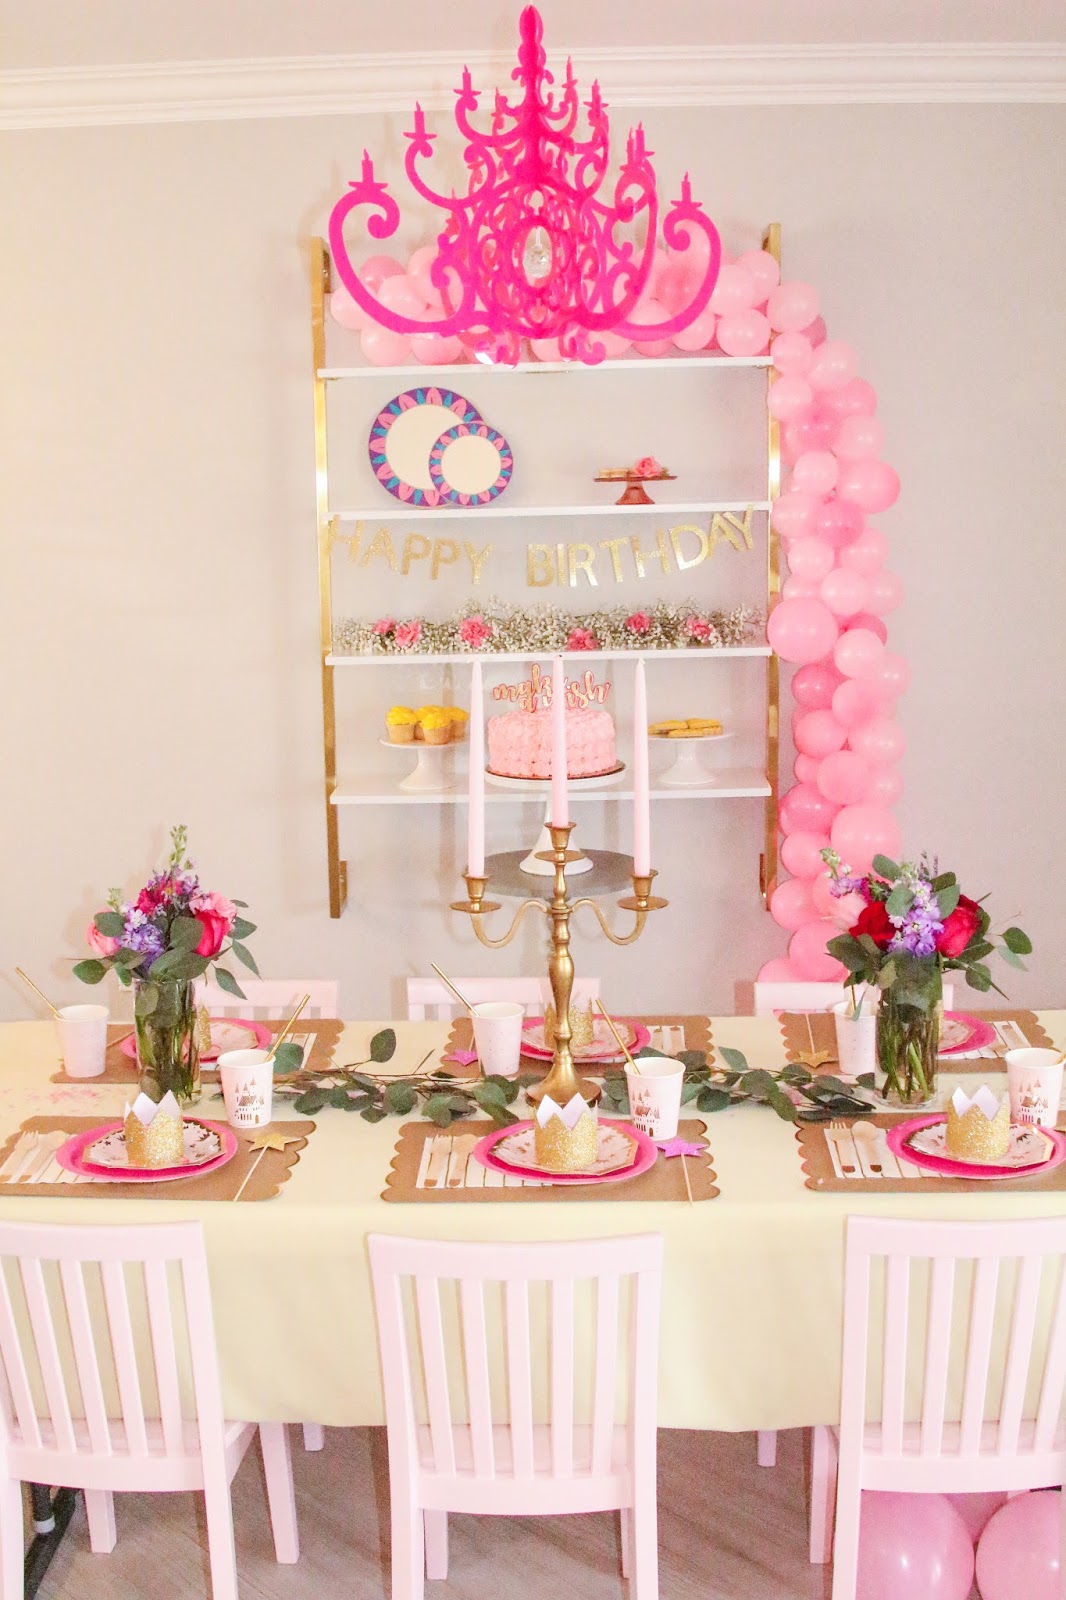 Beauty and the Beast Garden Party by popular party planning blogger Celebration Stylist